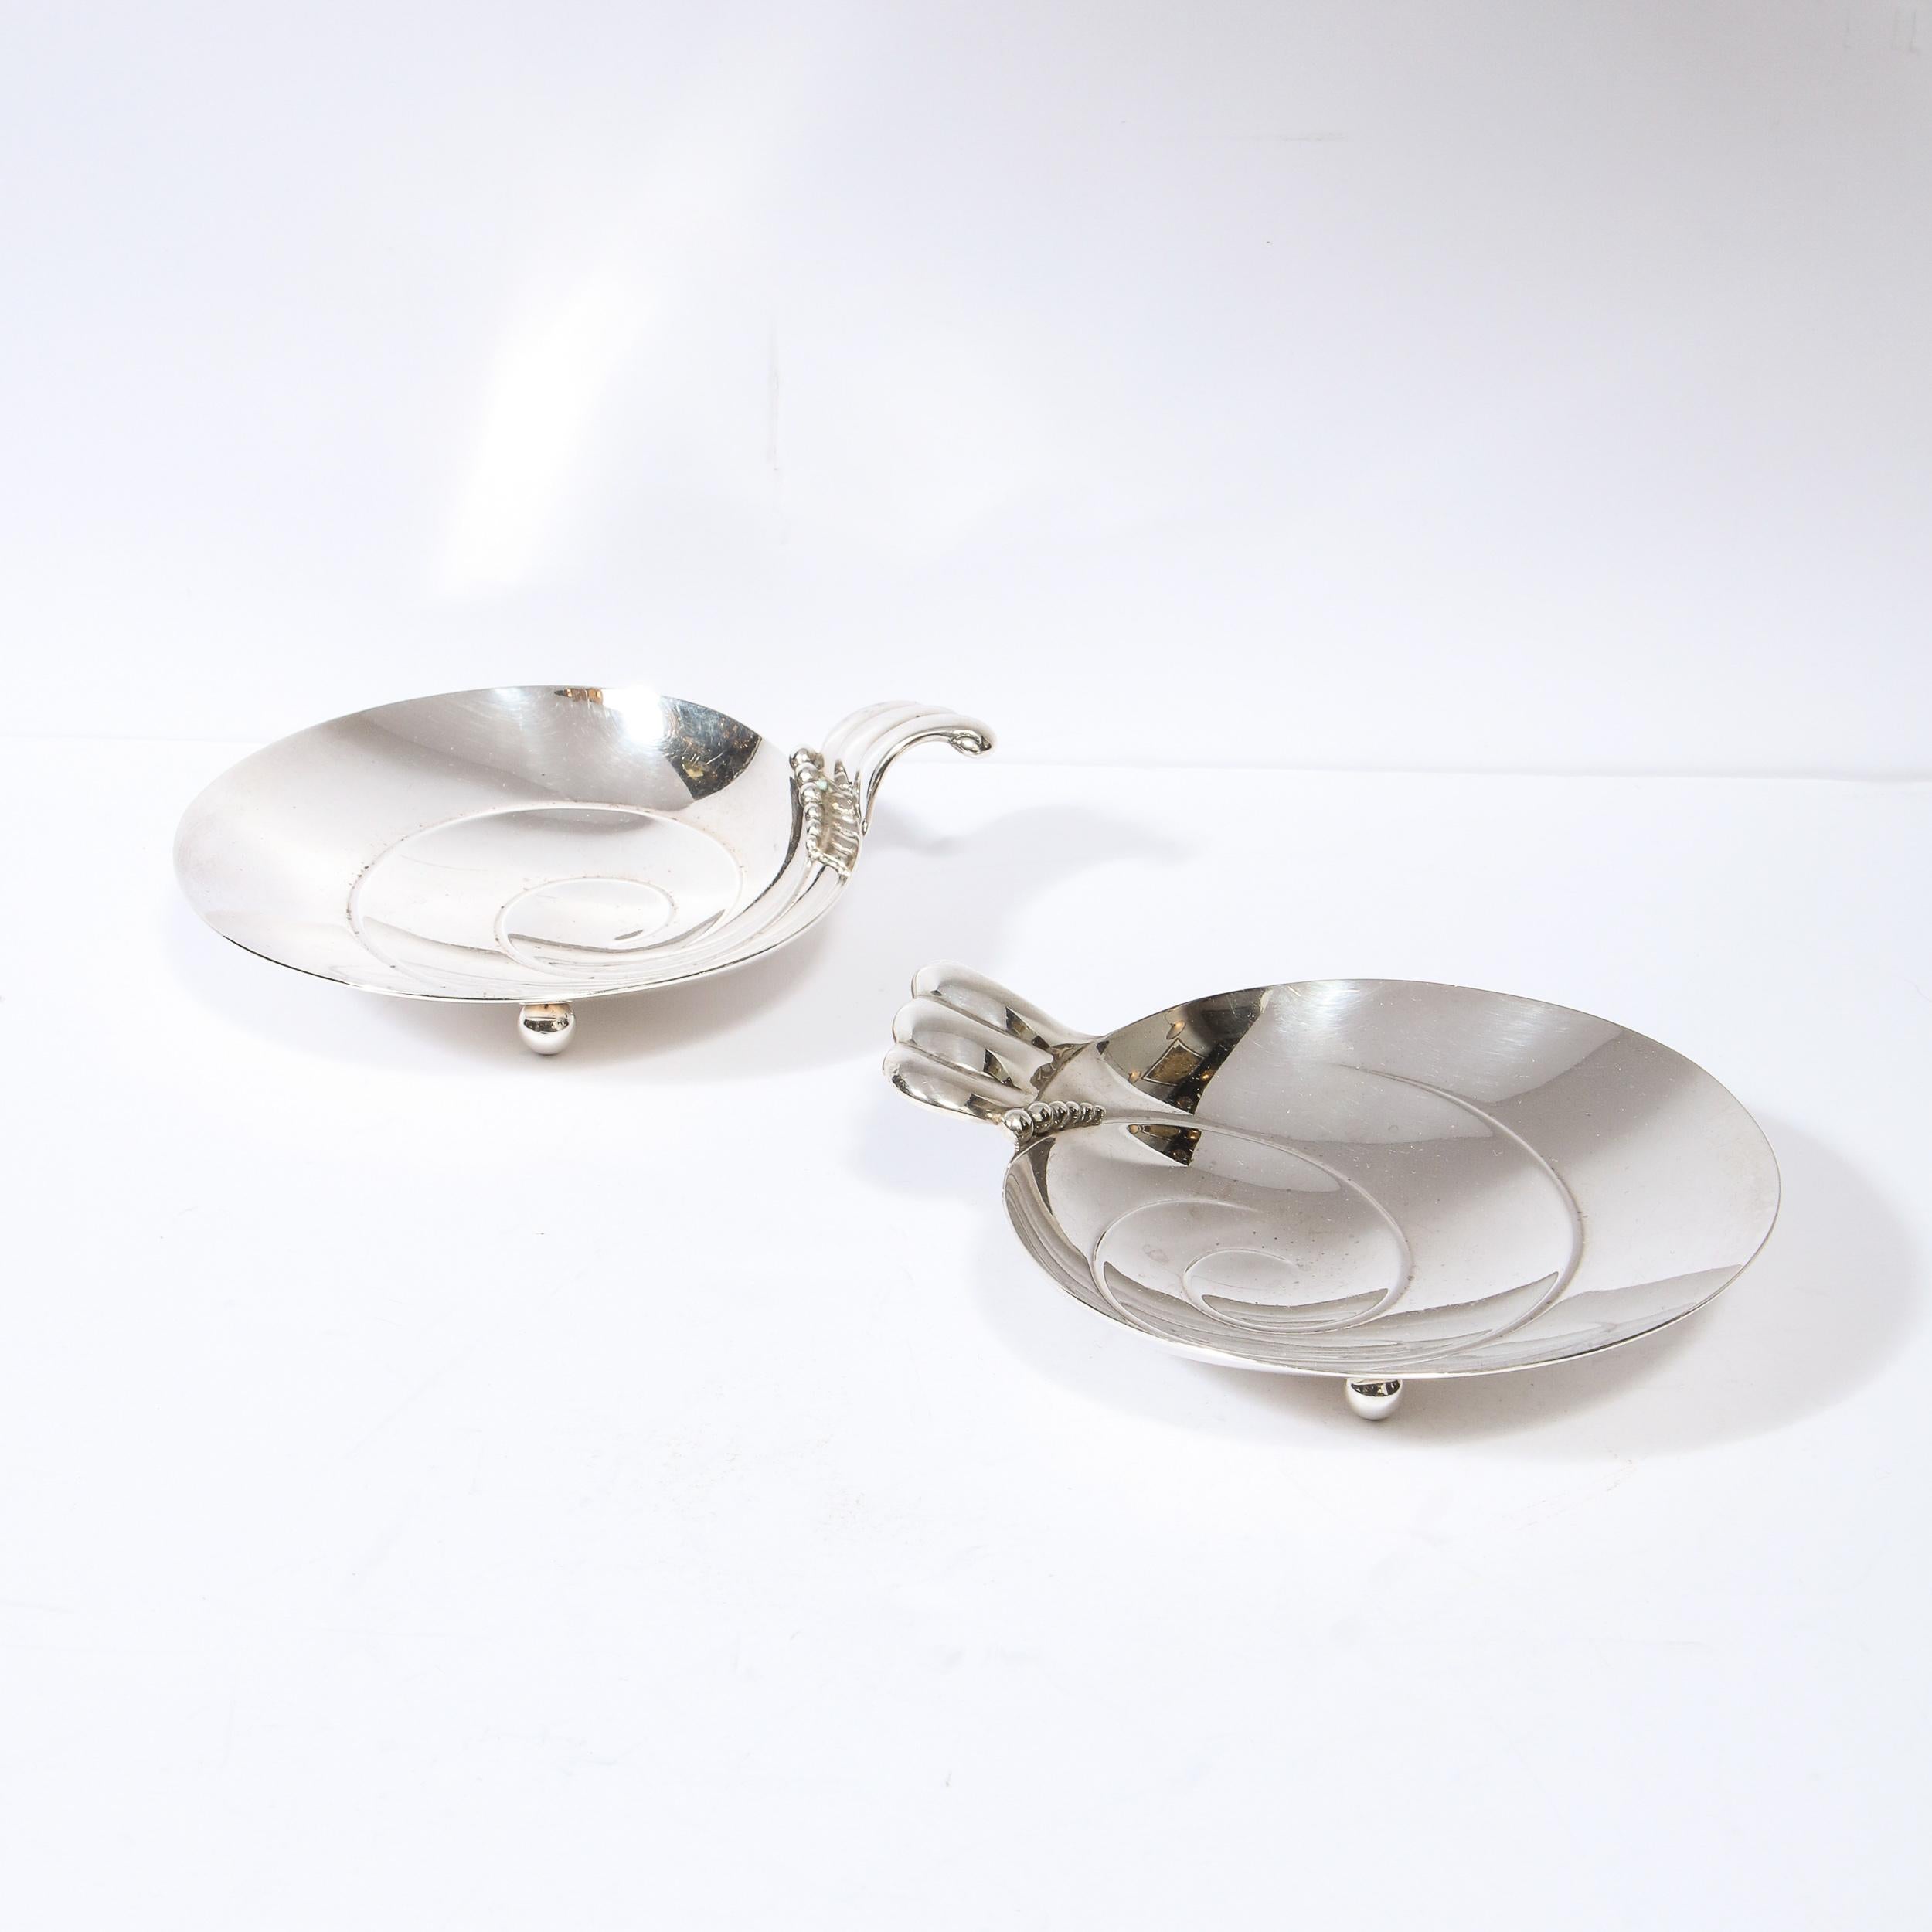 American Pair of Mid Century Modern Sterling Silver Footed Dishes Signed Tiffany & Co.